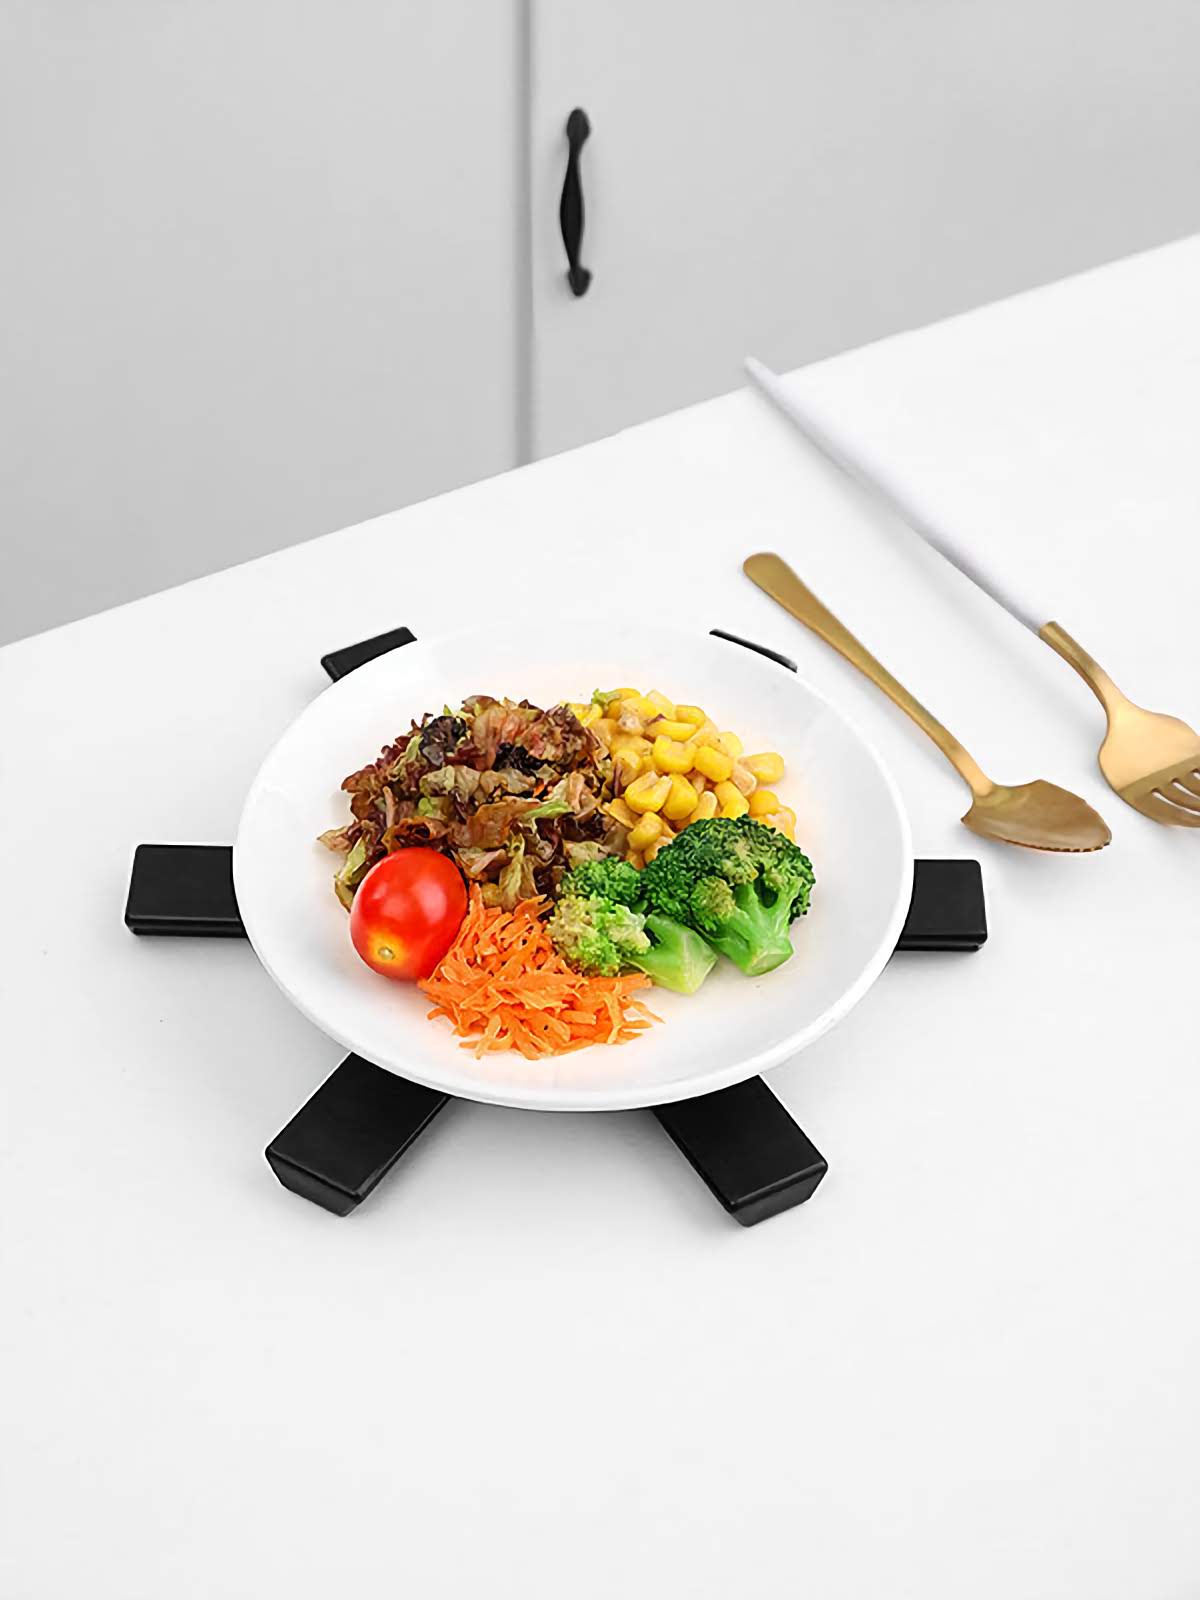 SmartFold Heat-Resistant Pan Mat: Durable, Insulated, and Anti-Slip Pot Placemat for Kitchen Use